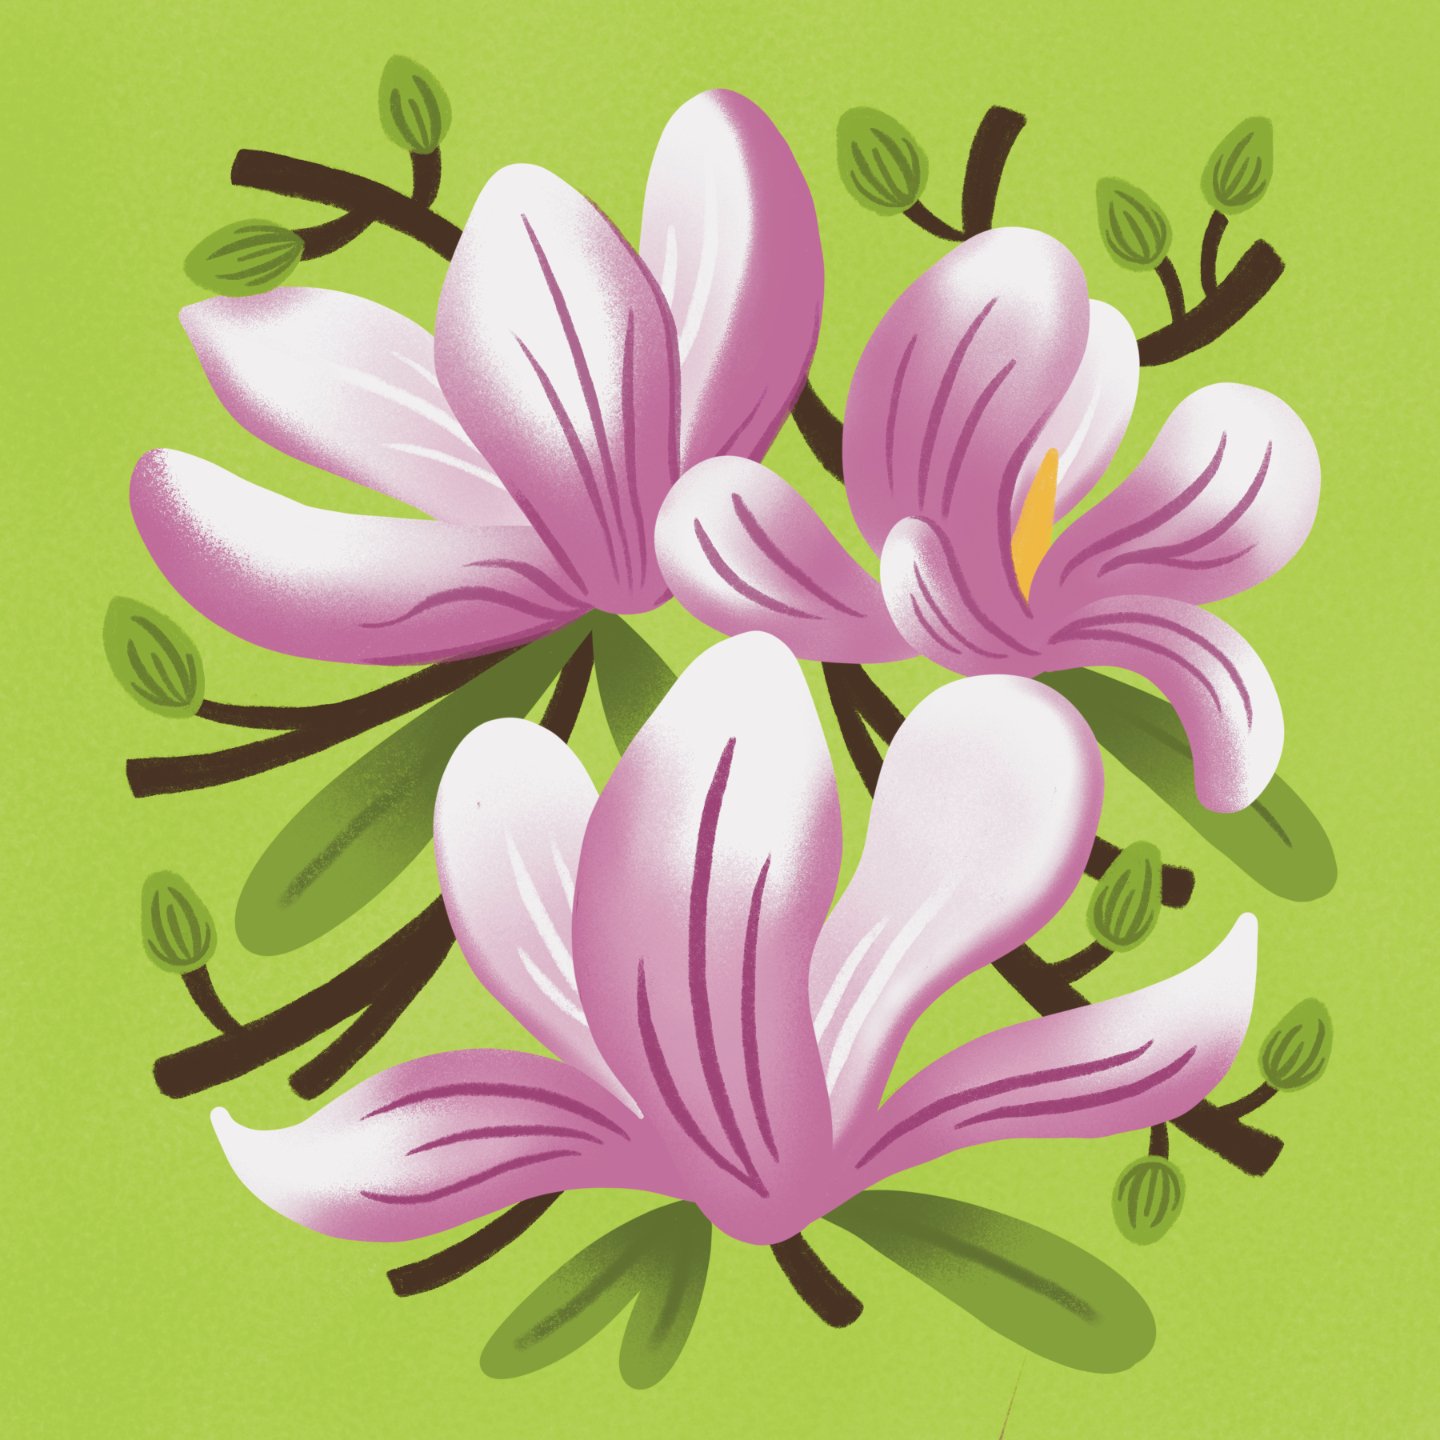 Happy Friday! Our beautiful magnolia tree bloomed last month and I finally finished up my illustration between client work. 

For #mixitupmay24 I chose to mix together chartreuse, playful, and blooms. 

Hosted by:
@iamgiagraham
@byerikewithak
@heyali